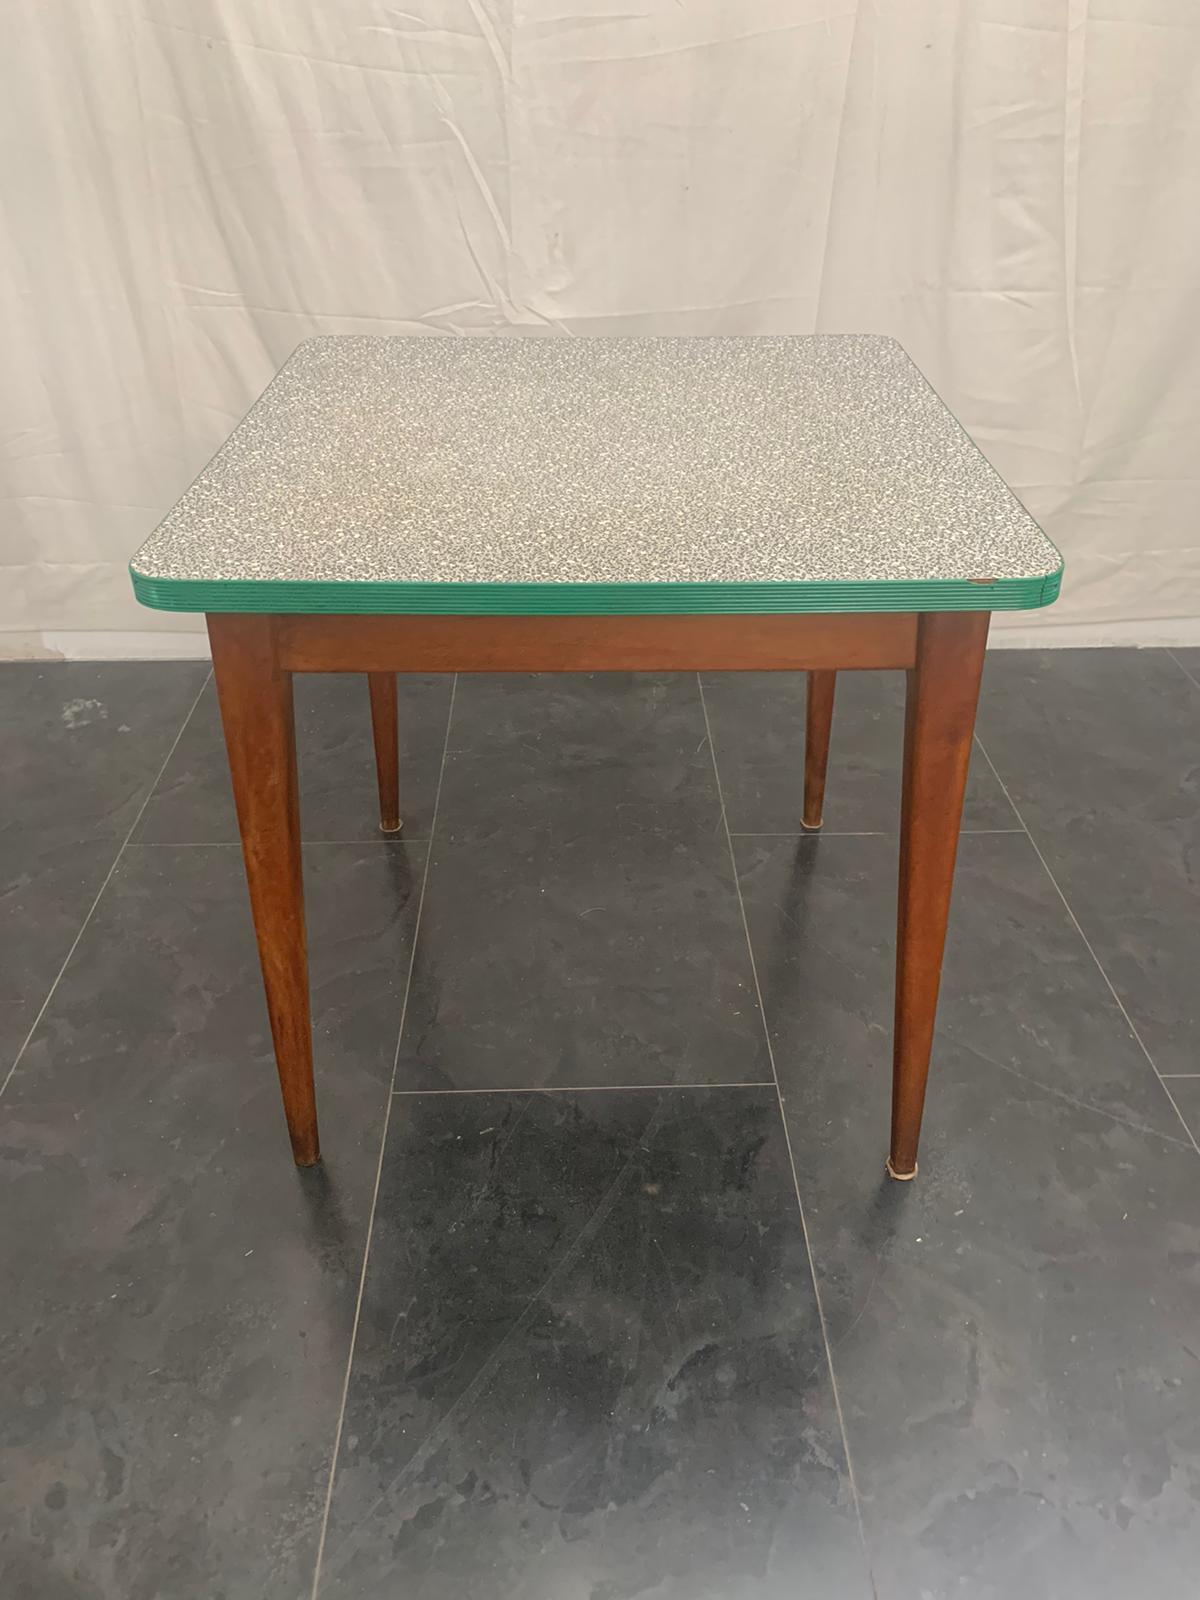 Mid-Century Modern Table with Green Mosaic Laminate Top, 1950s For Sale